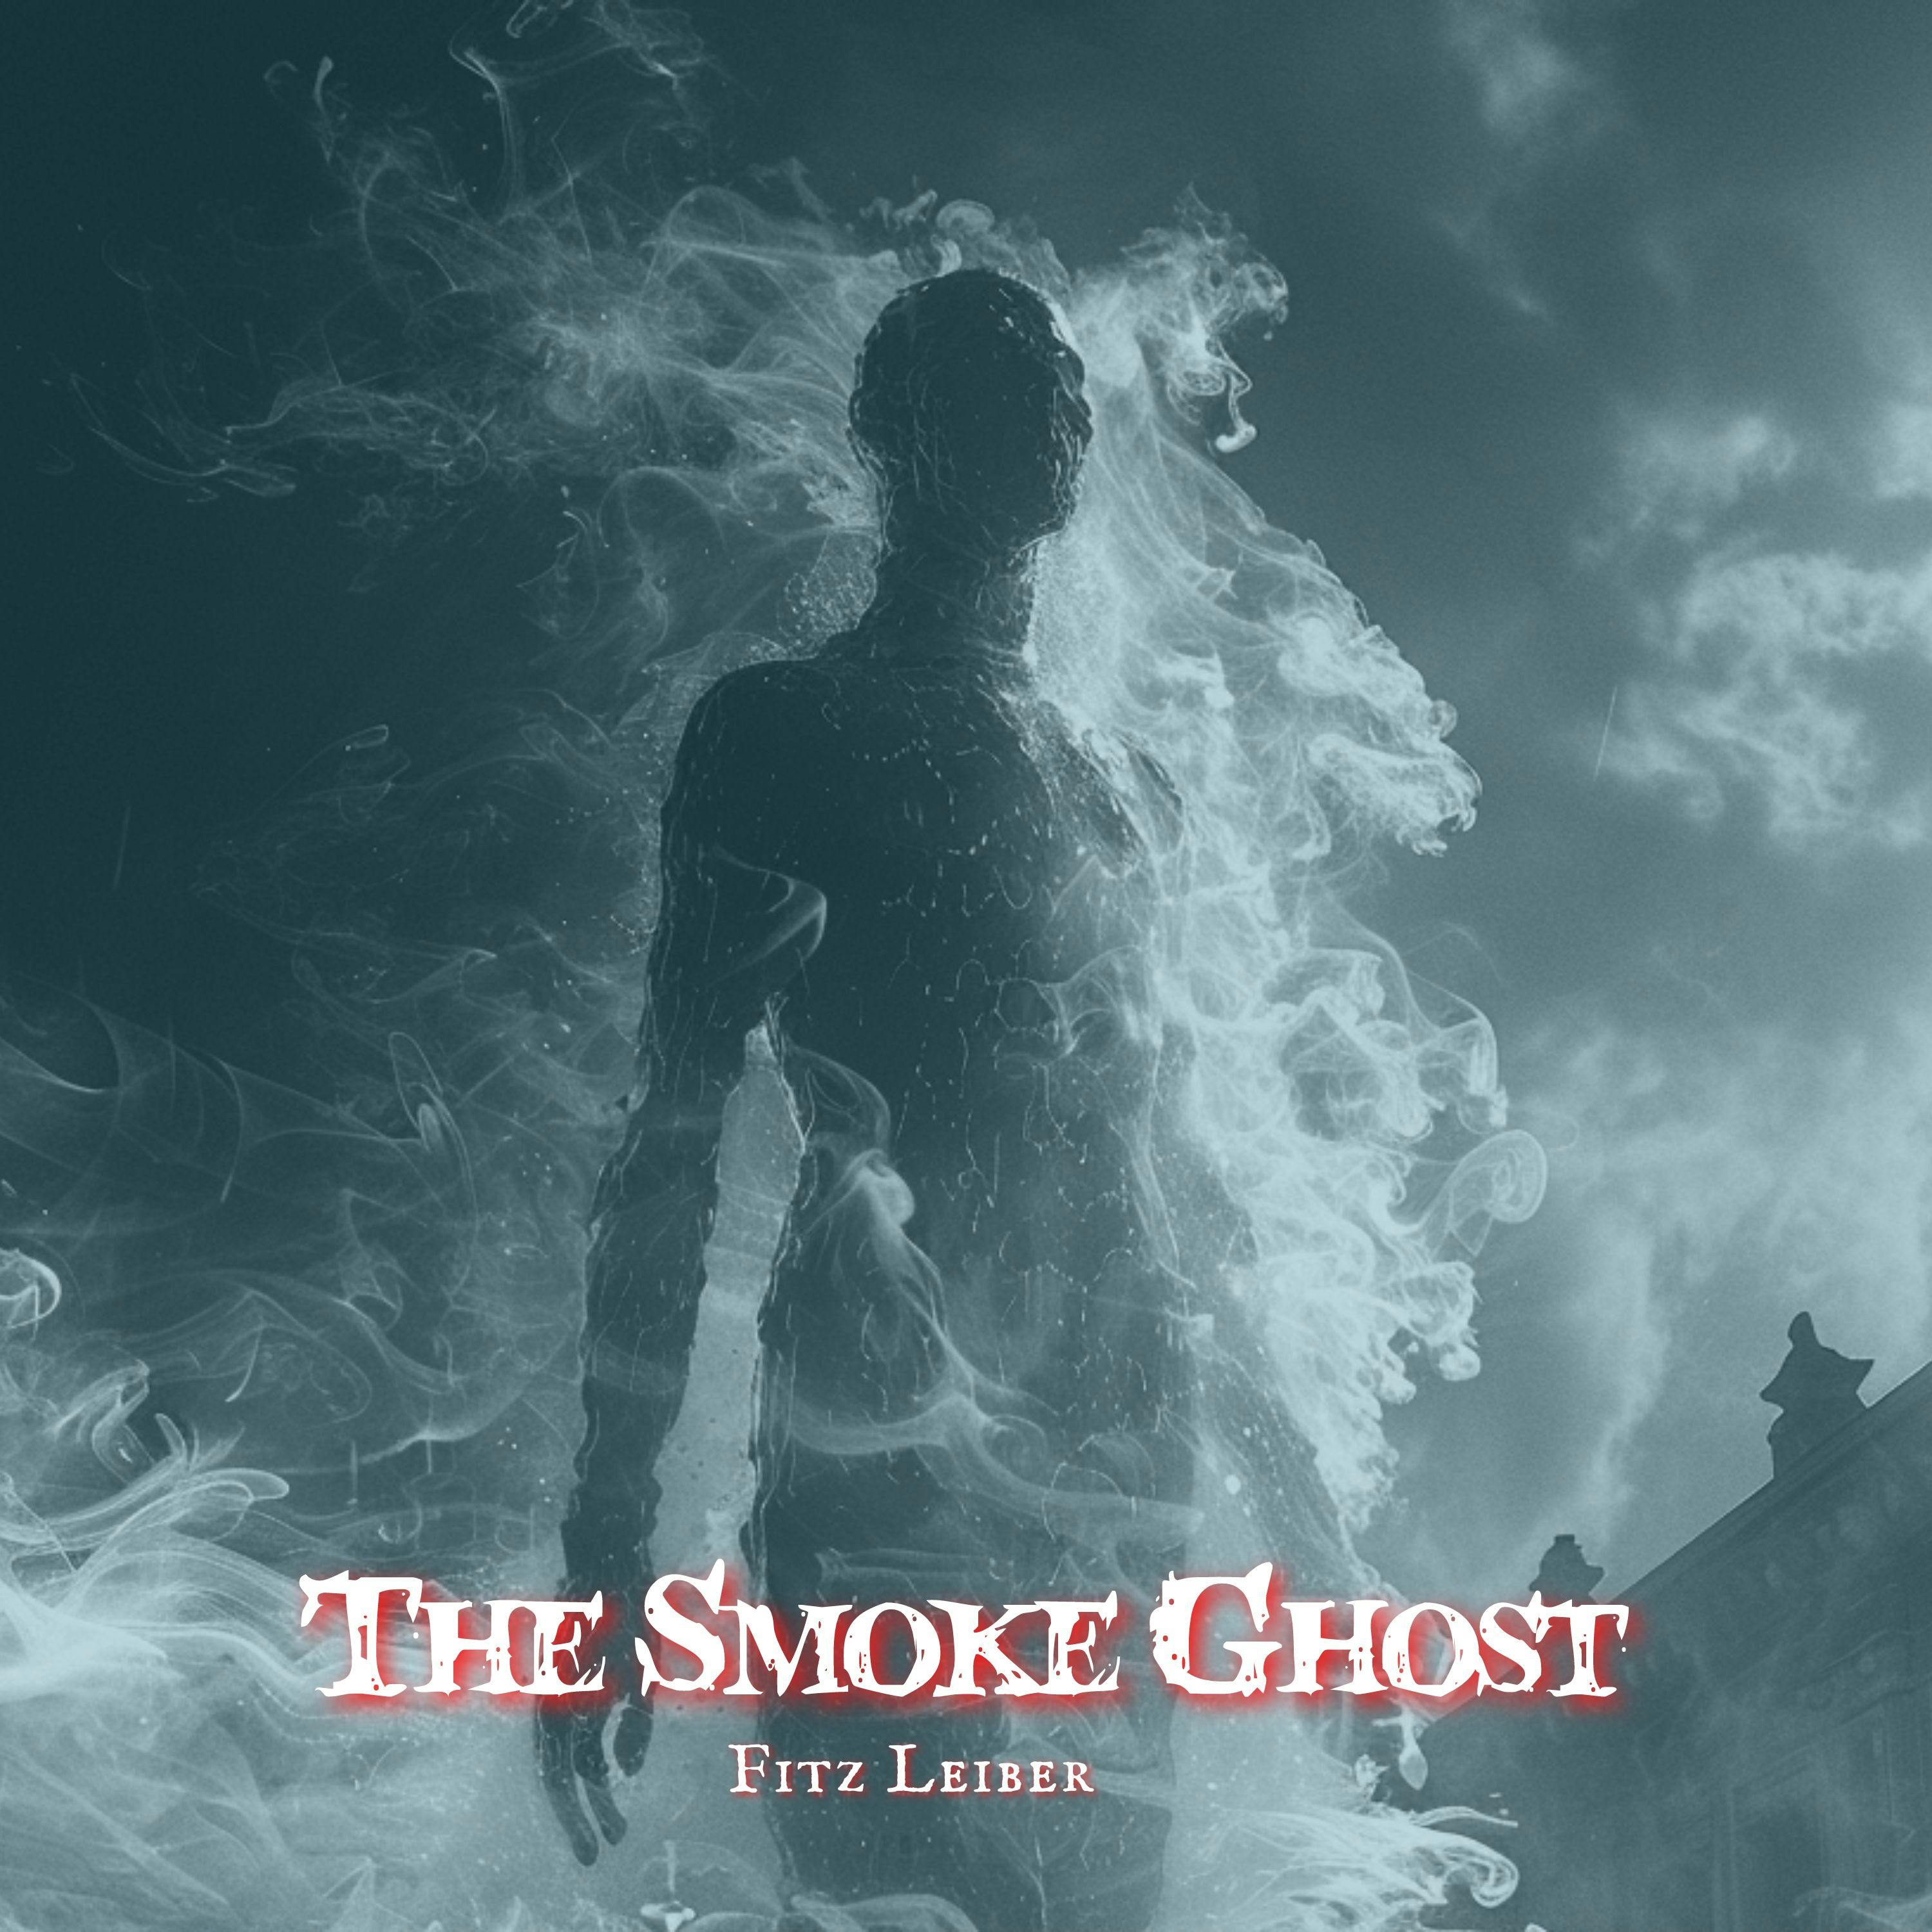 The Smoke Ghost by Fritz Leiber